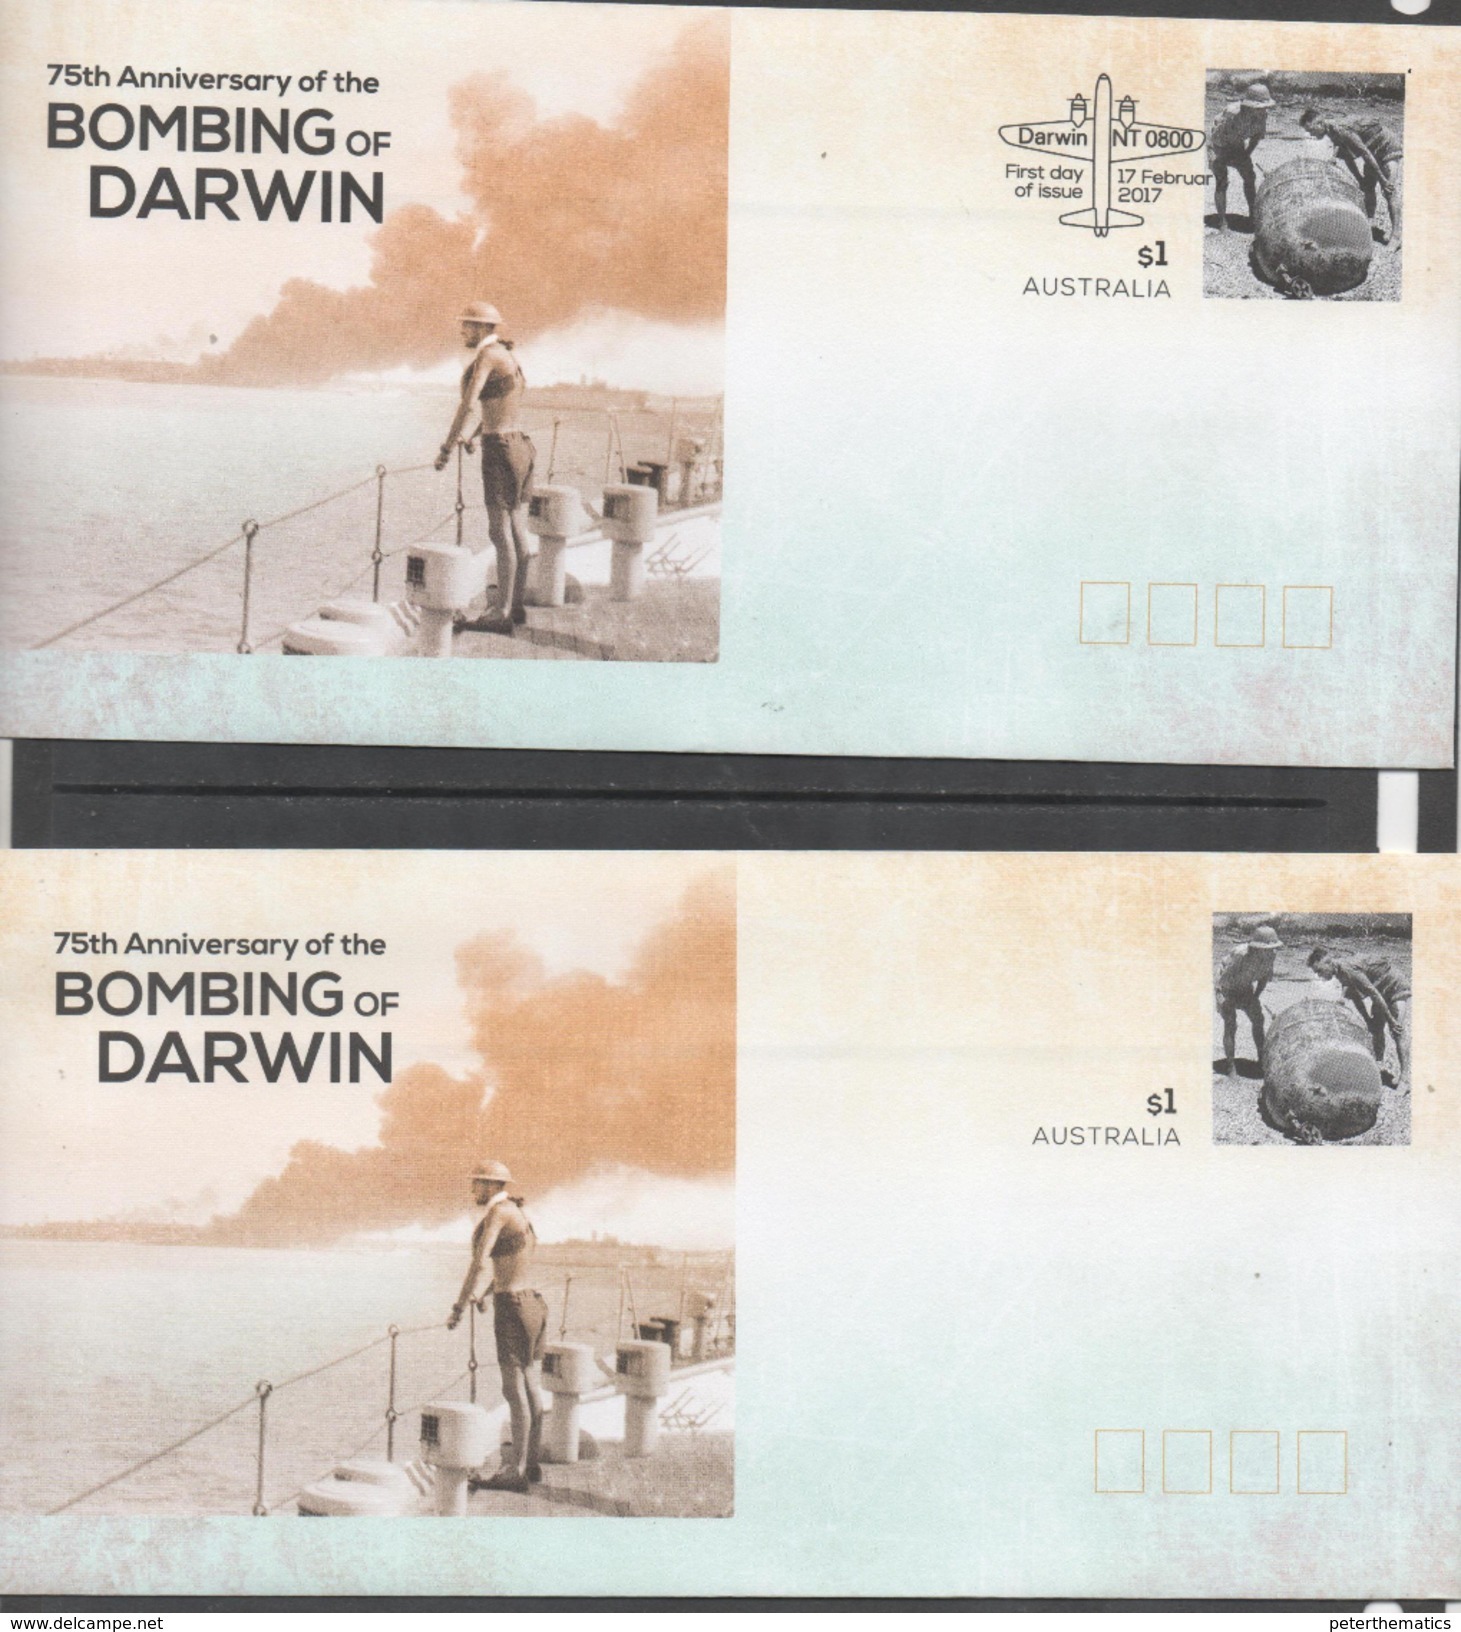 AUSTRALIA, 2017, POSTAL STATIONERY, 2 PREPAID ENVELOPES, WWII, DARWIN BOMBING, SHIPS,1 MINT+1 FIRST DAY CANCELLATION - Guerre Mondiale (Seconde)